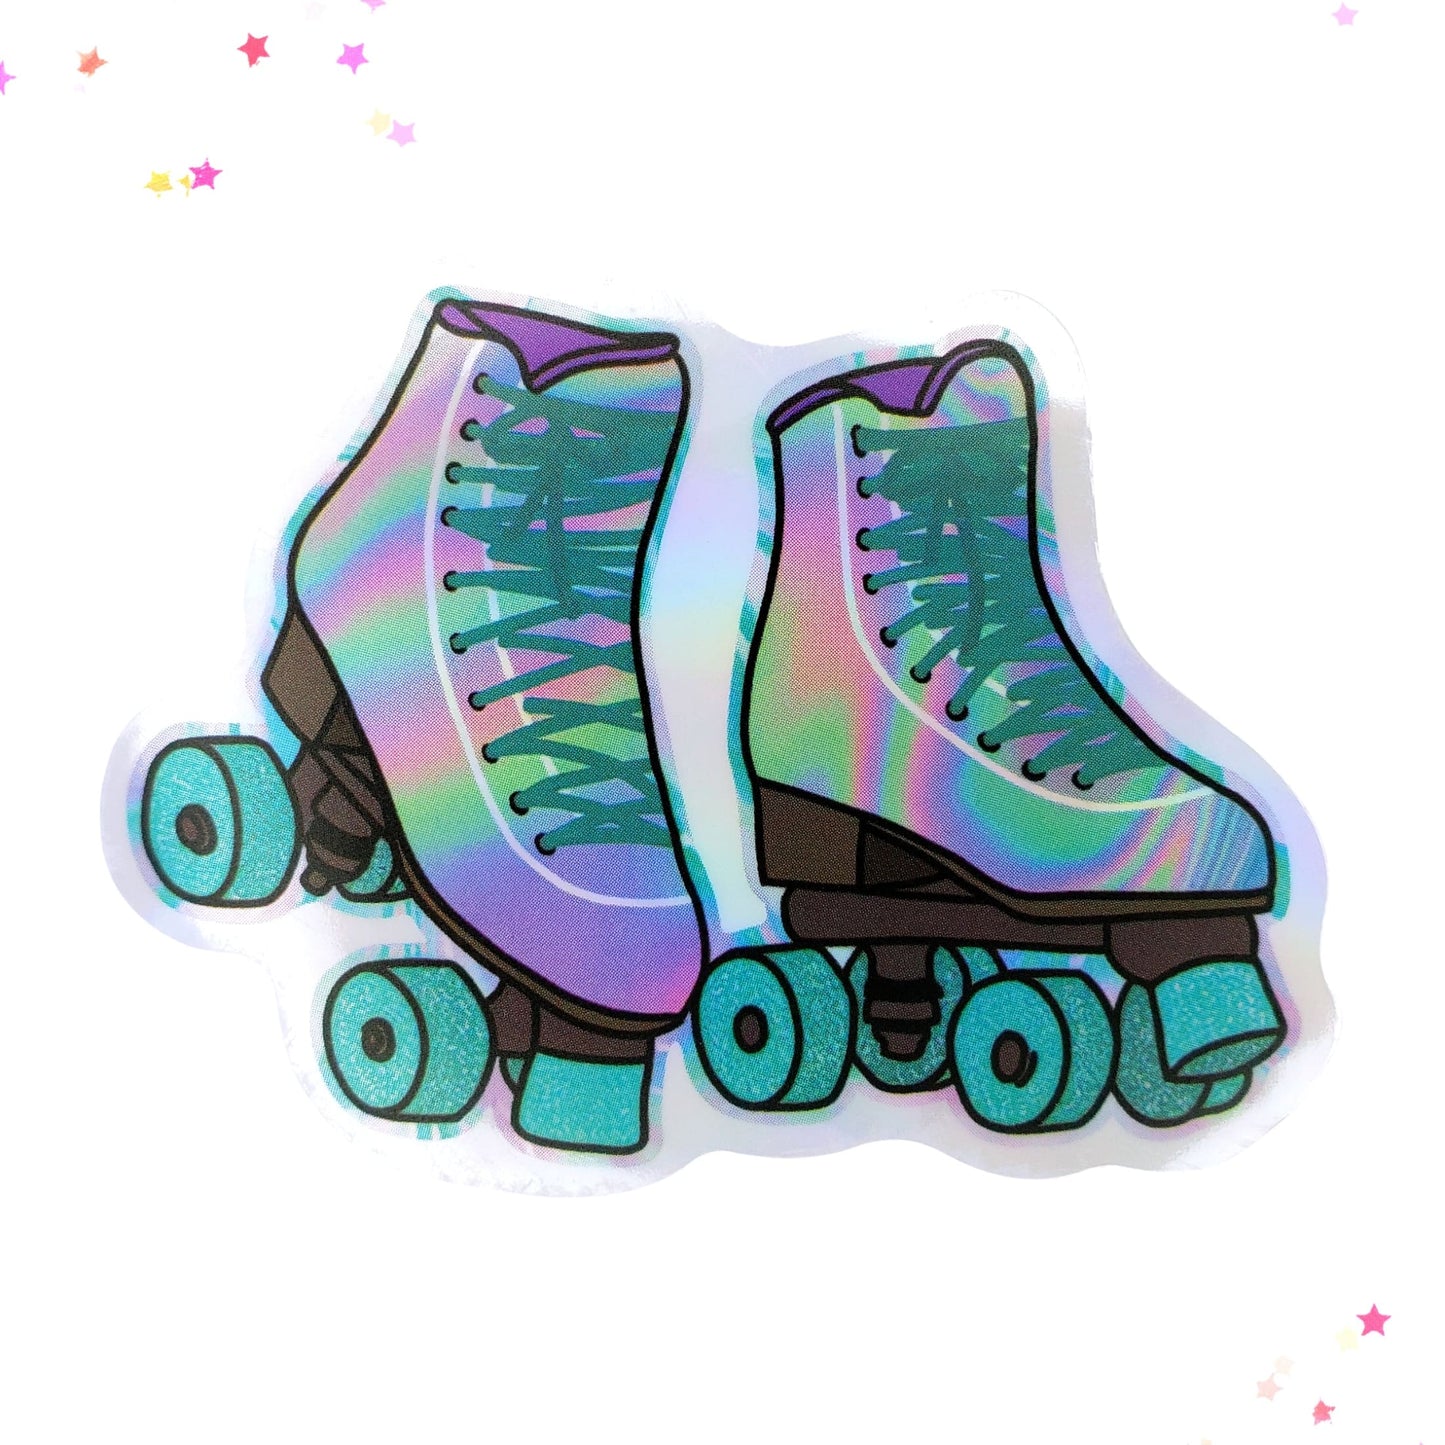 Roller Skates with Teal Wheels Waterproof Holographic Sticker from Confetti Kitty, Only 1.0